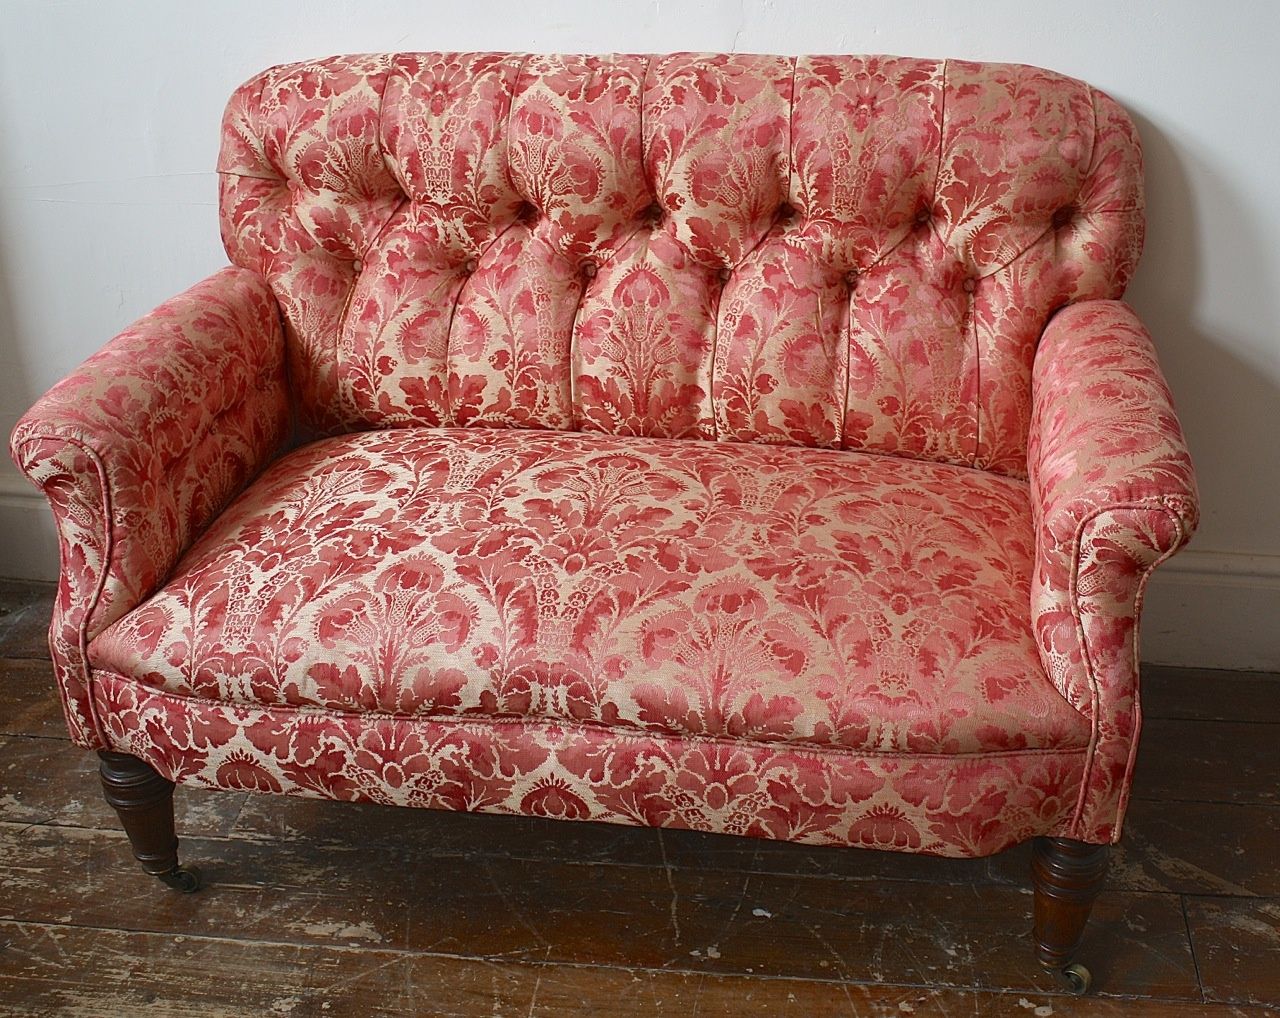 Leather Chairs Of Bath Early Victorian Sofa, Antique Sofa With Regard To Victorian Leather Sofas (View 14 of 15)